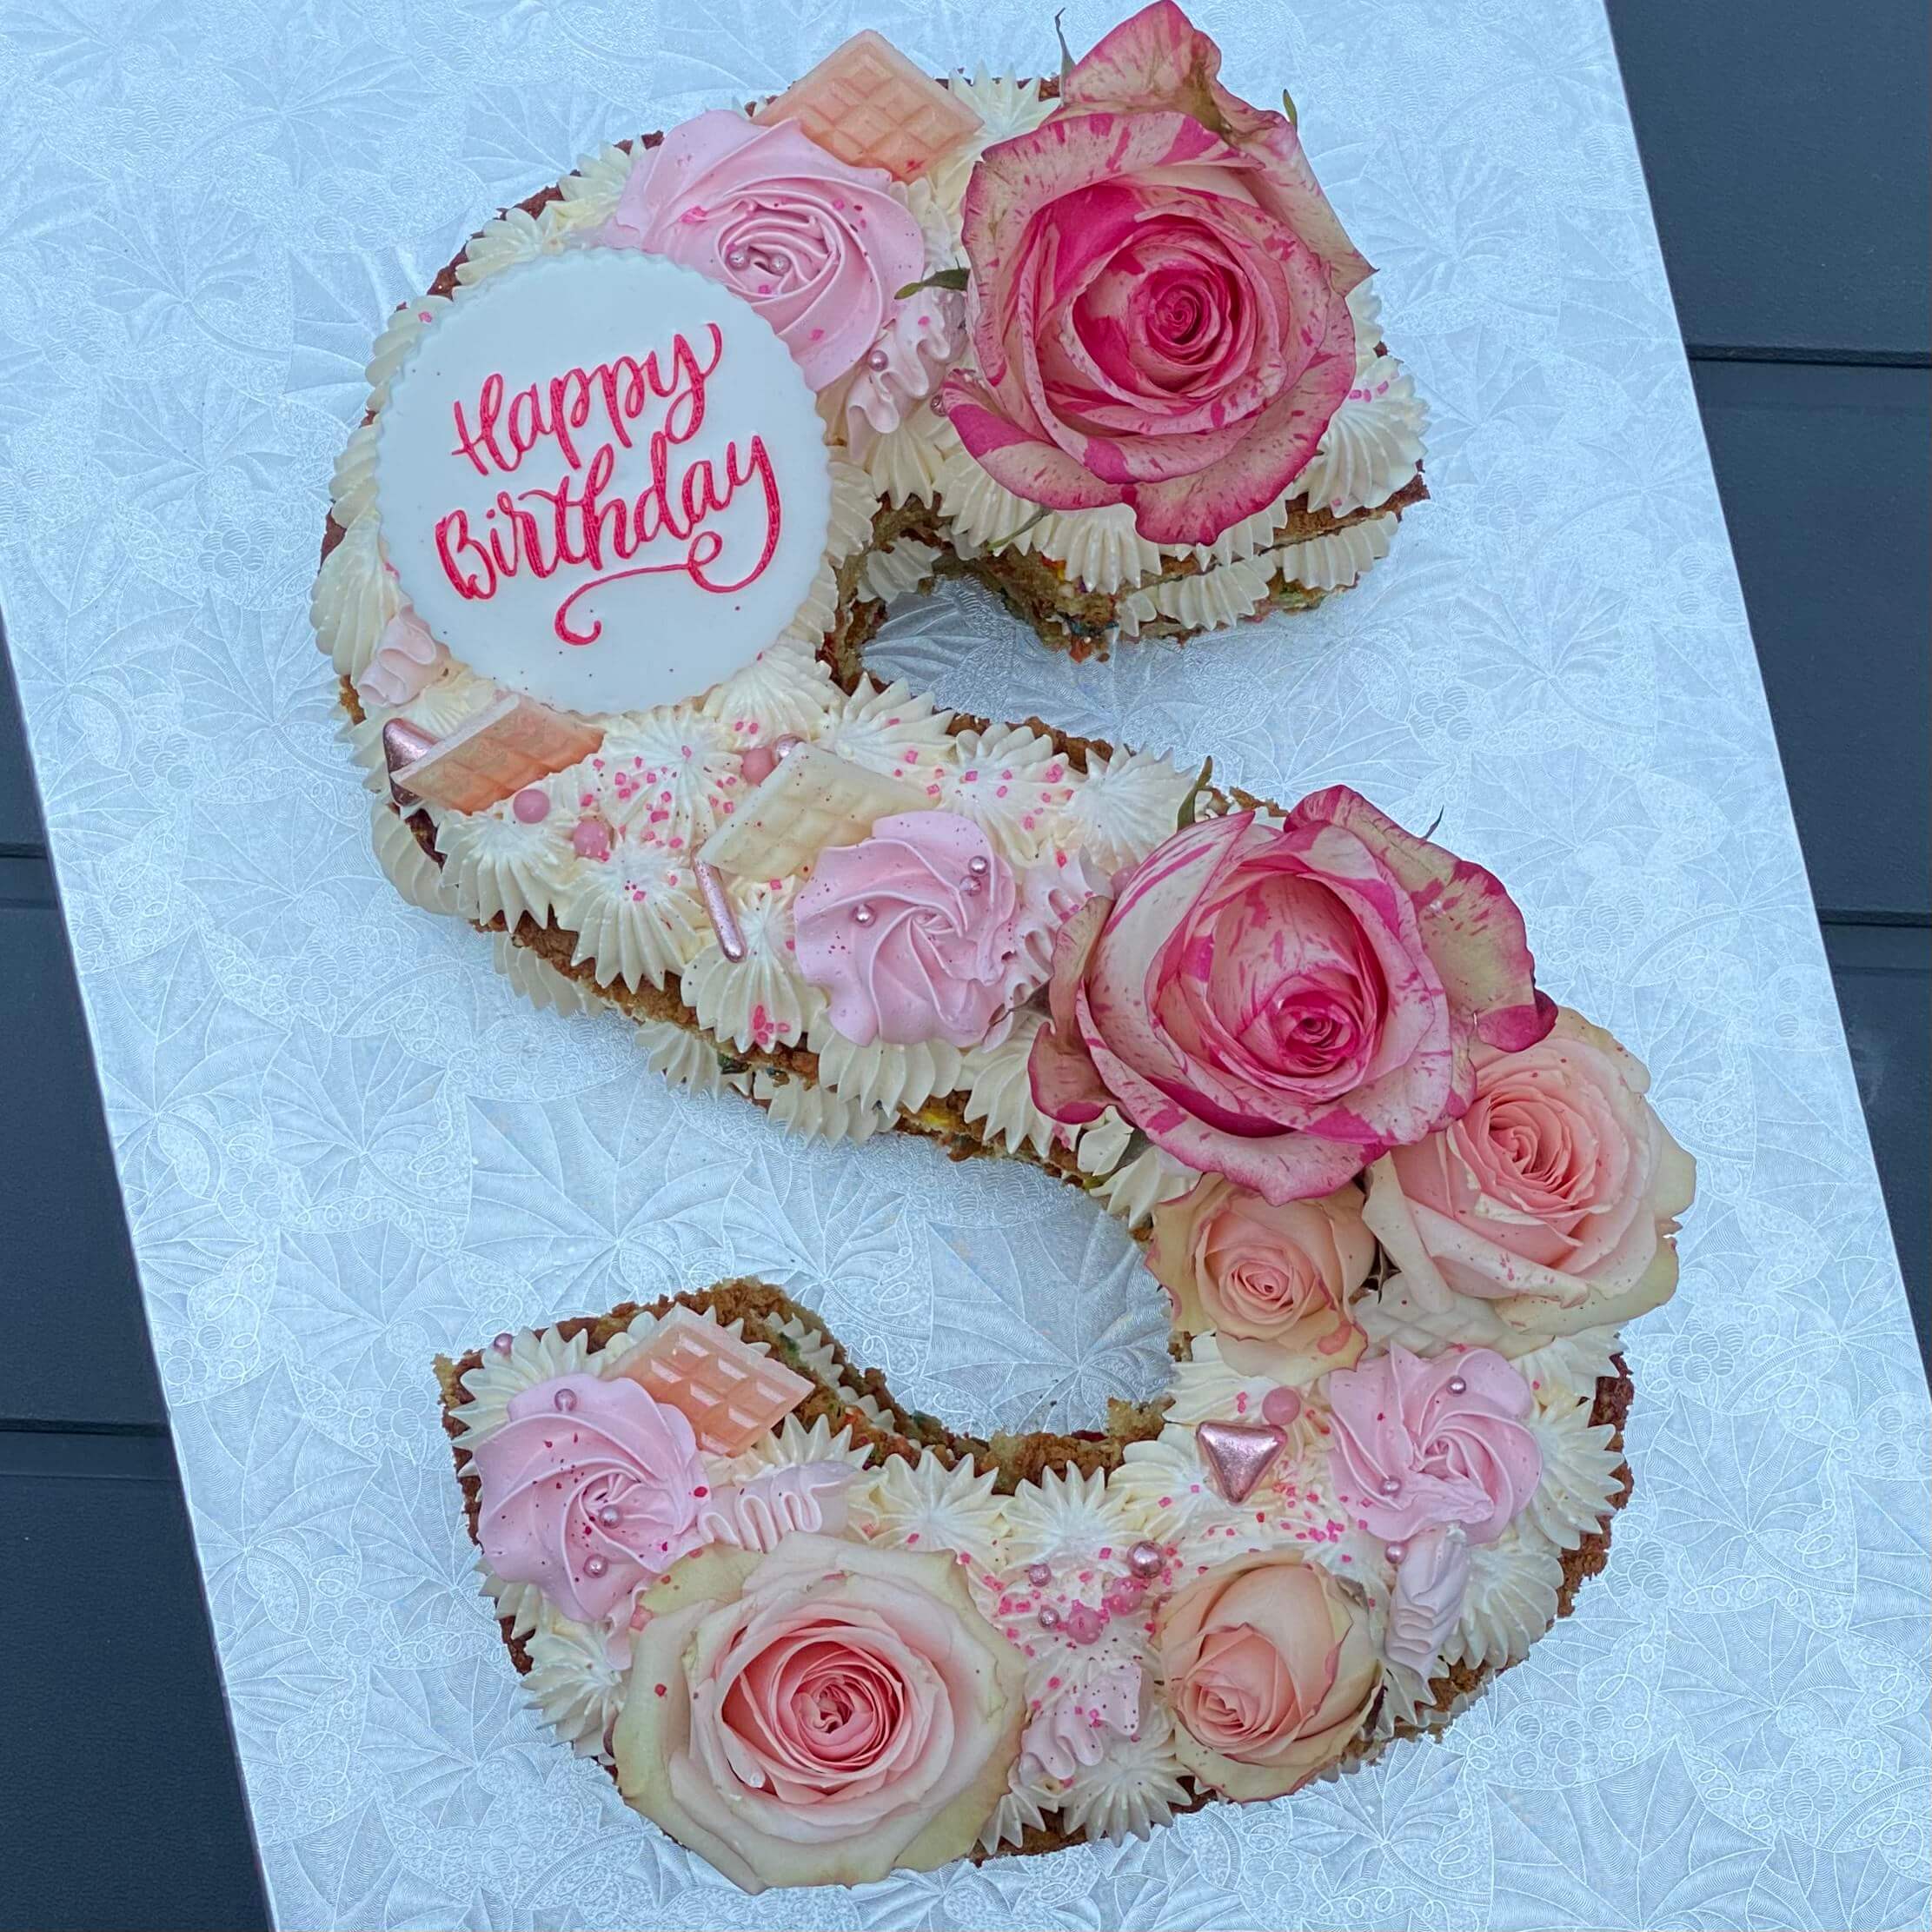 Gluten-Free Nut-Free Letter Cakes